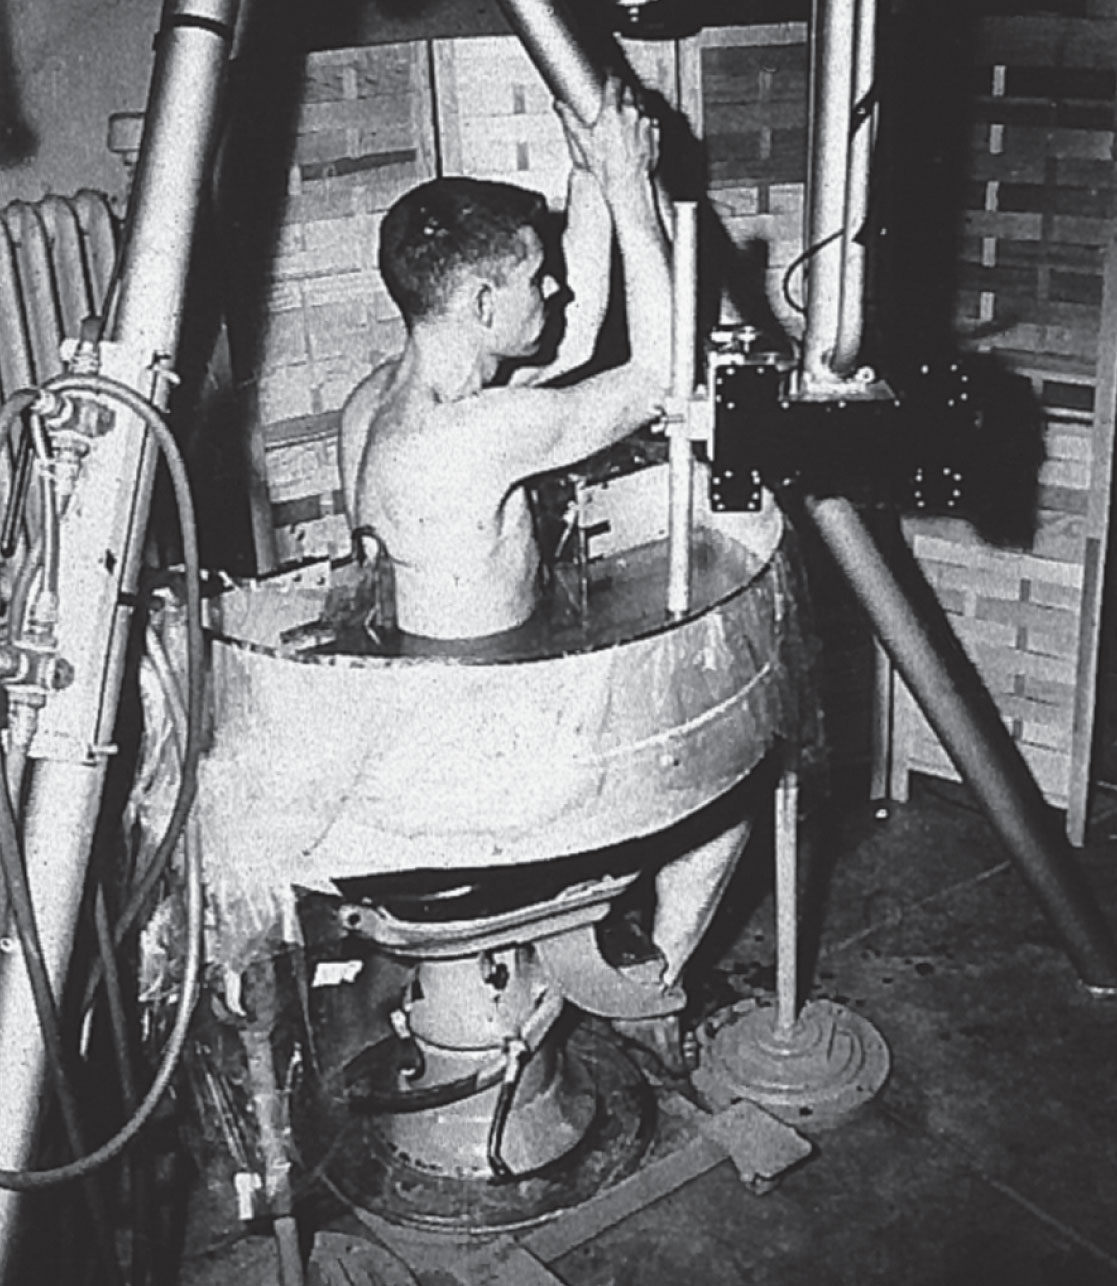 Fig. 1.3, The Pan Scanner , put together by the Holmes, Howry, Posakony, and Richard Cushman team in 1957, was a landmark invention in the history of B-mode ultrasonography. With the Pan Scanner, the patient sat on a modified dental chair strapped against a plastic window of a semicircular pan filled with saline solution while the transducer rotated through the solution in a semicircular arc.